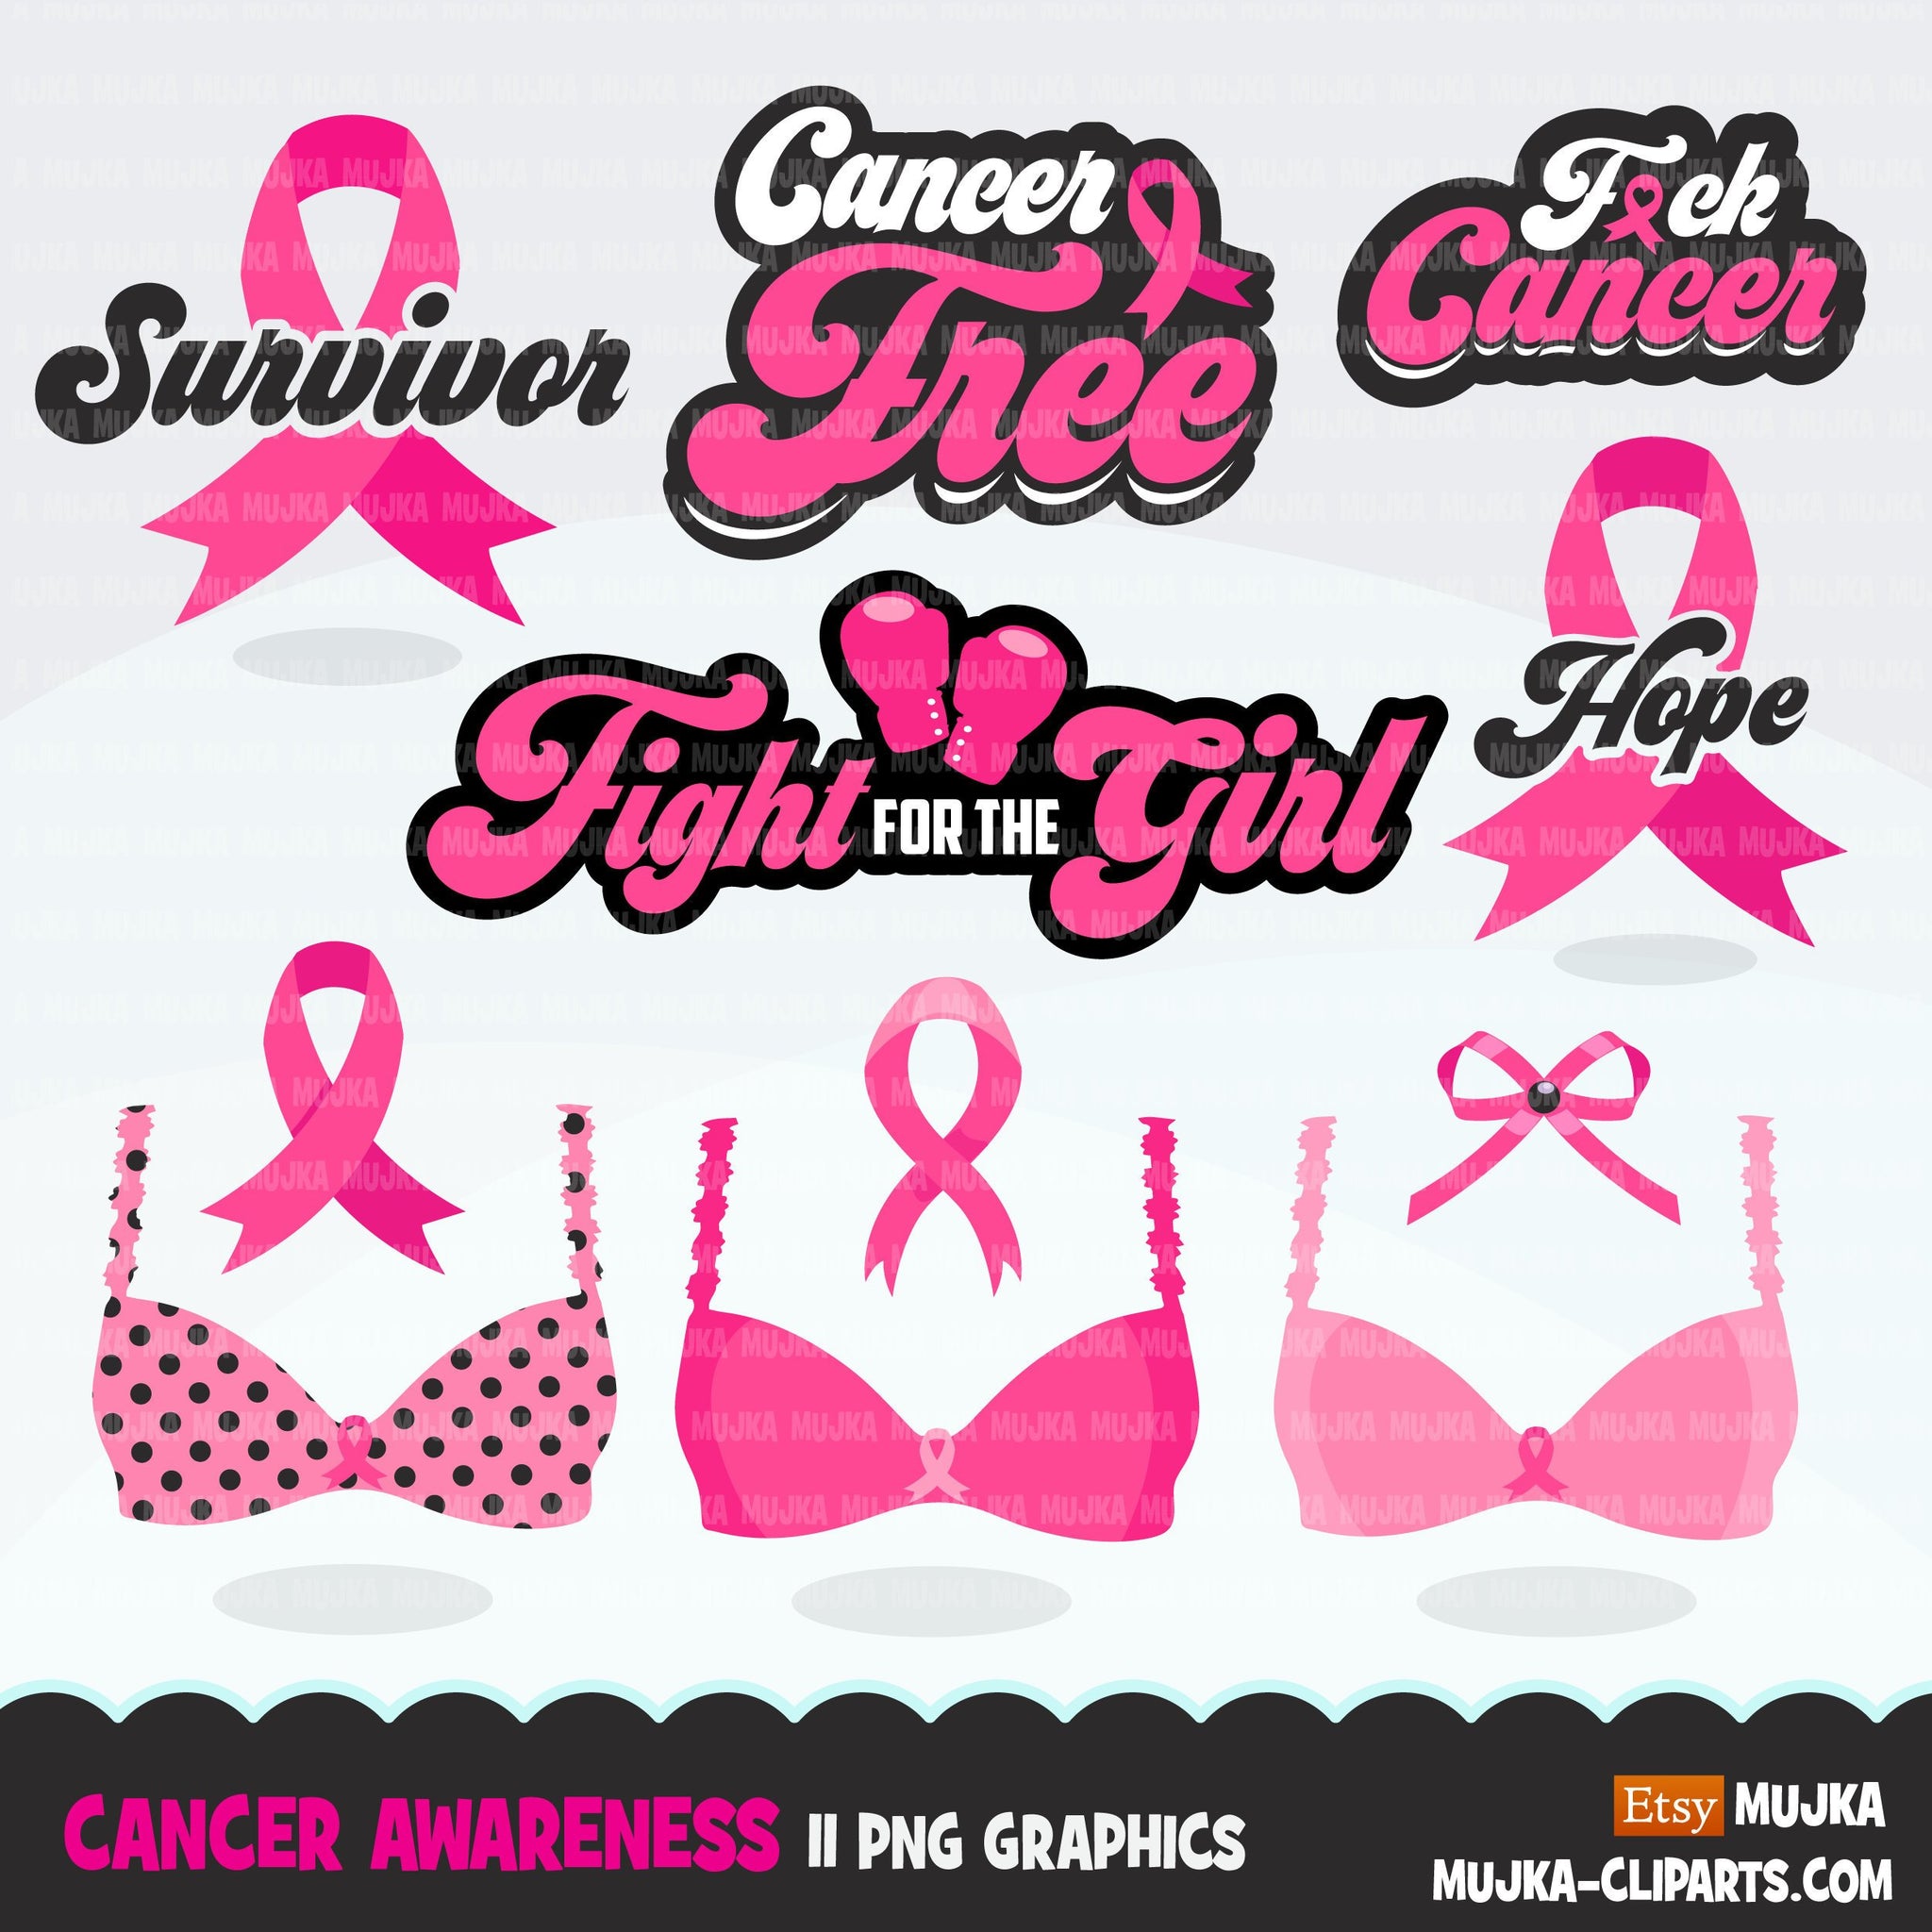 Breast Cancer awareness clipart. Pink boxing gloves, fight for the